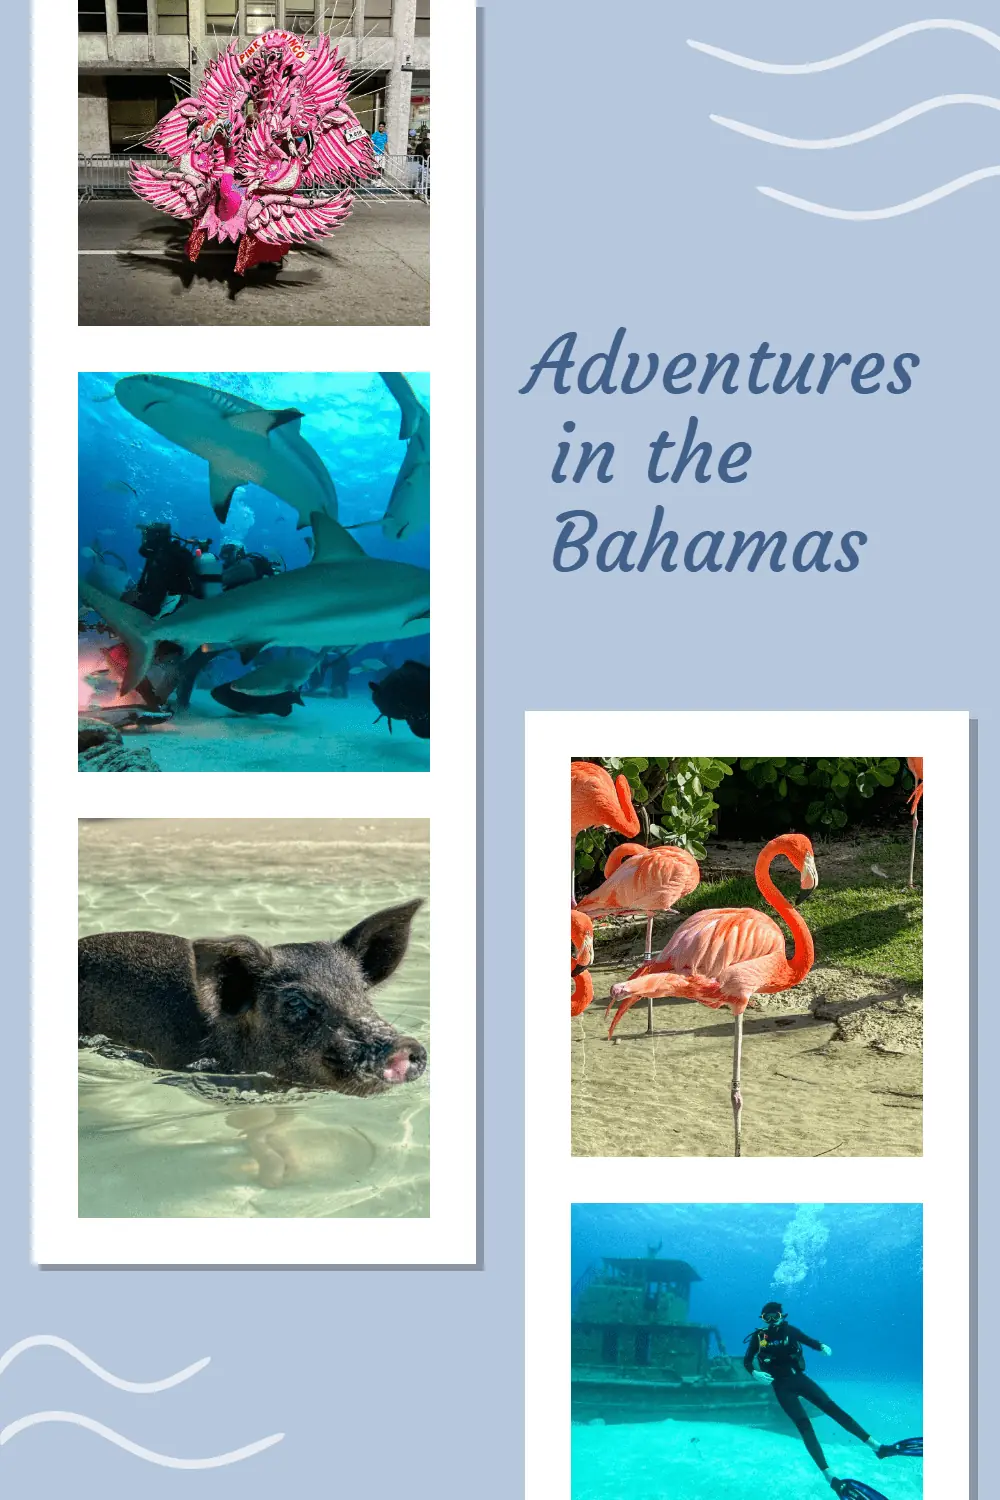 Although the Bahamas is very close to the US, it is a different world with many possibilities for adventures, including swimming with pigs and diving with sharks. #Bahamastravel